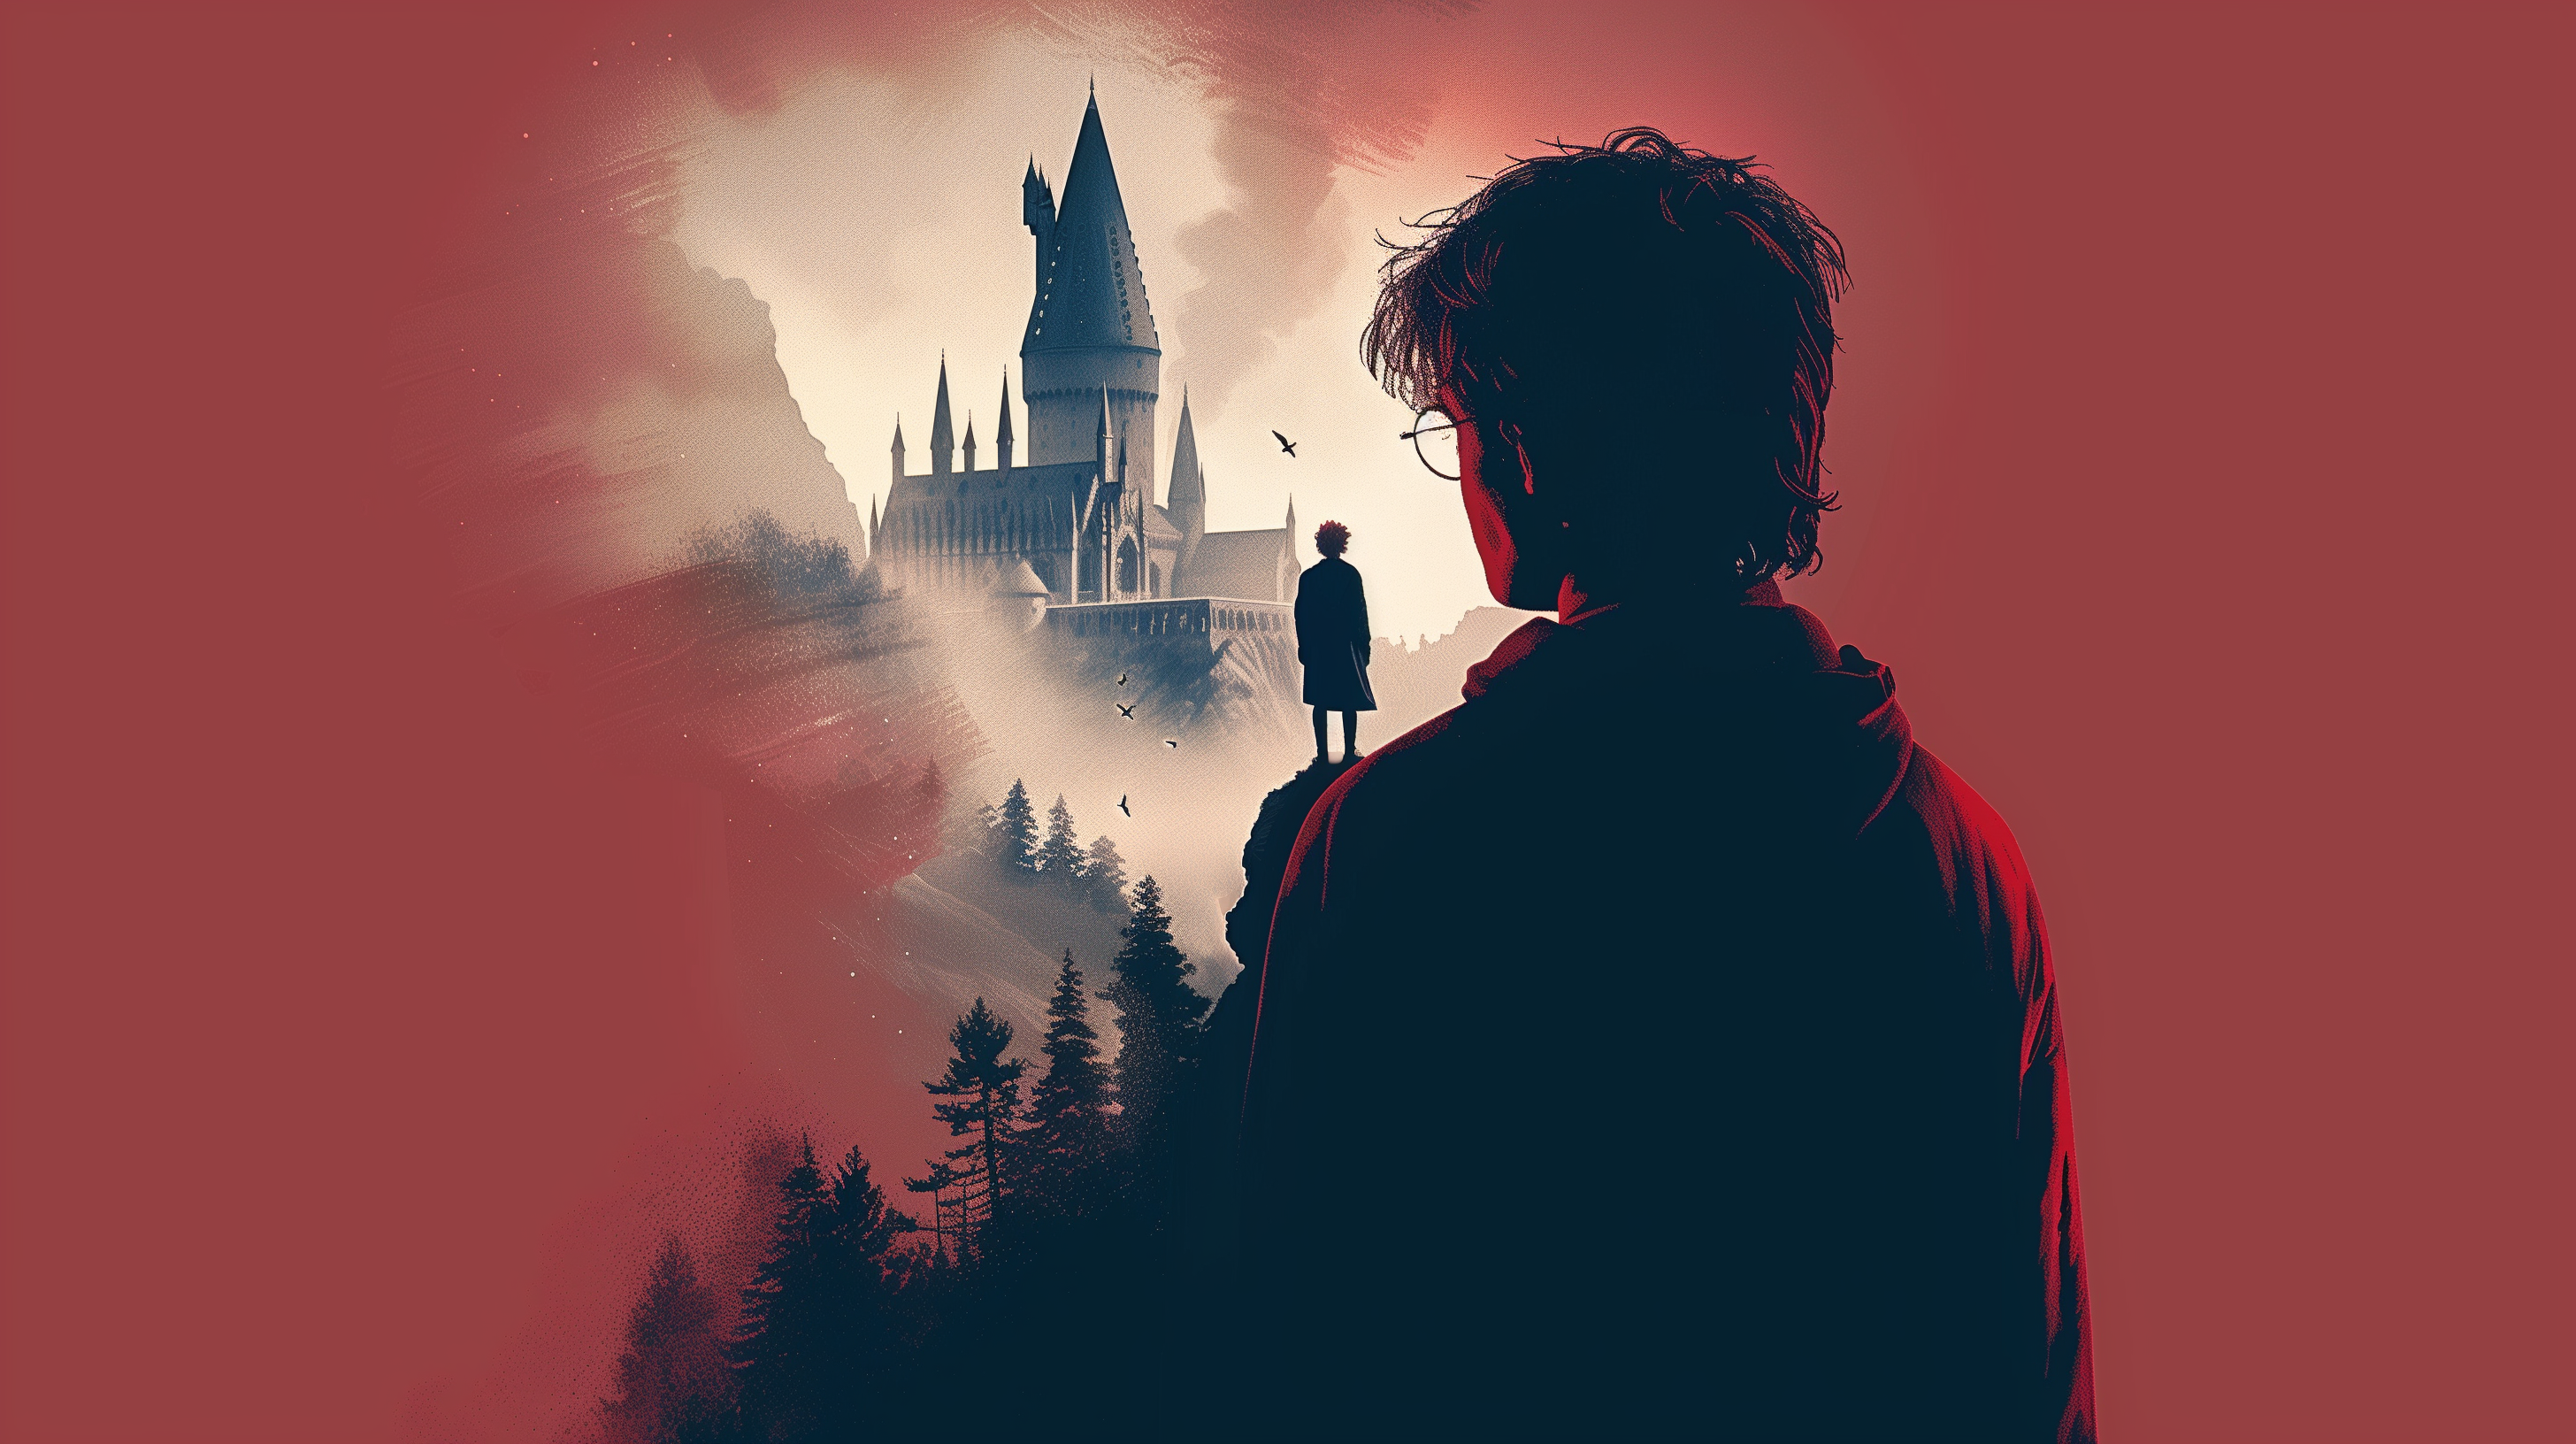 370+] Harry Potter Wallpapers